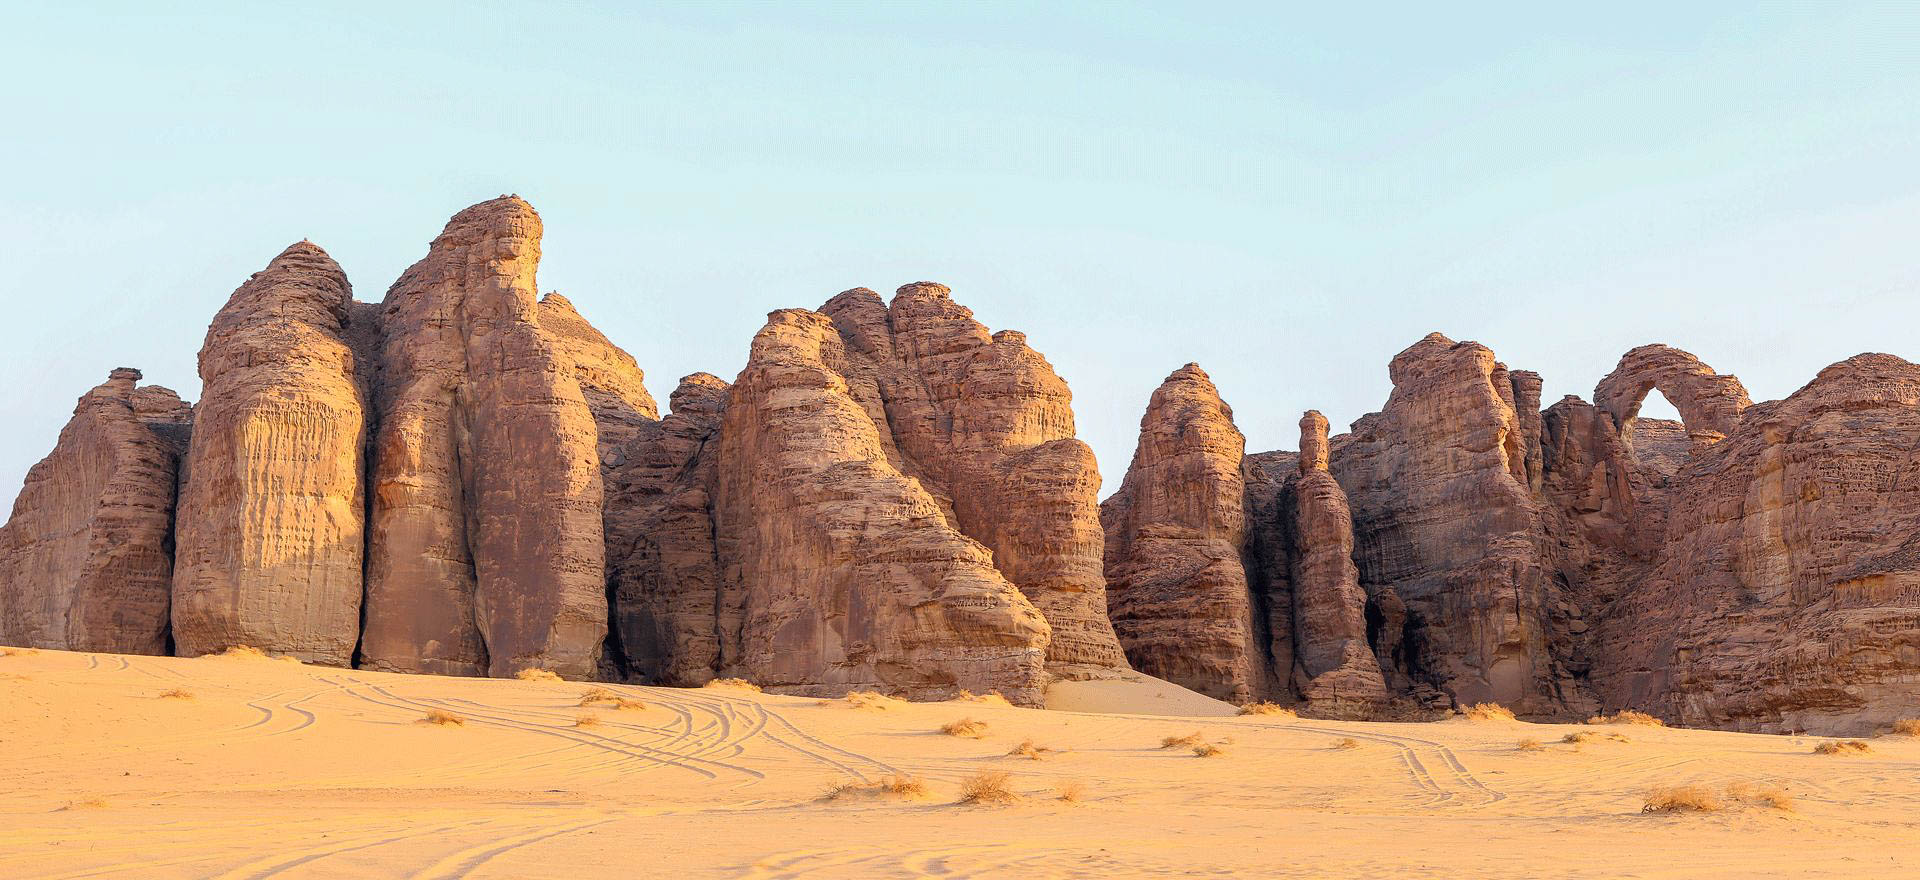 Eroded sandstone rocks in the desert - Saudi Arabia Holidays and tours